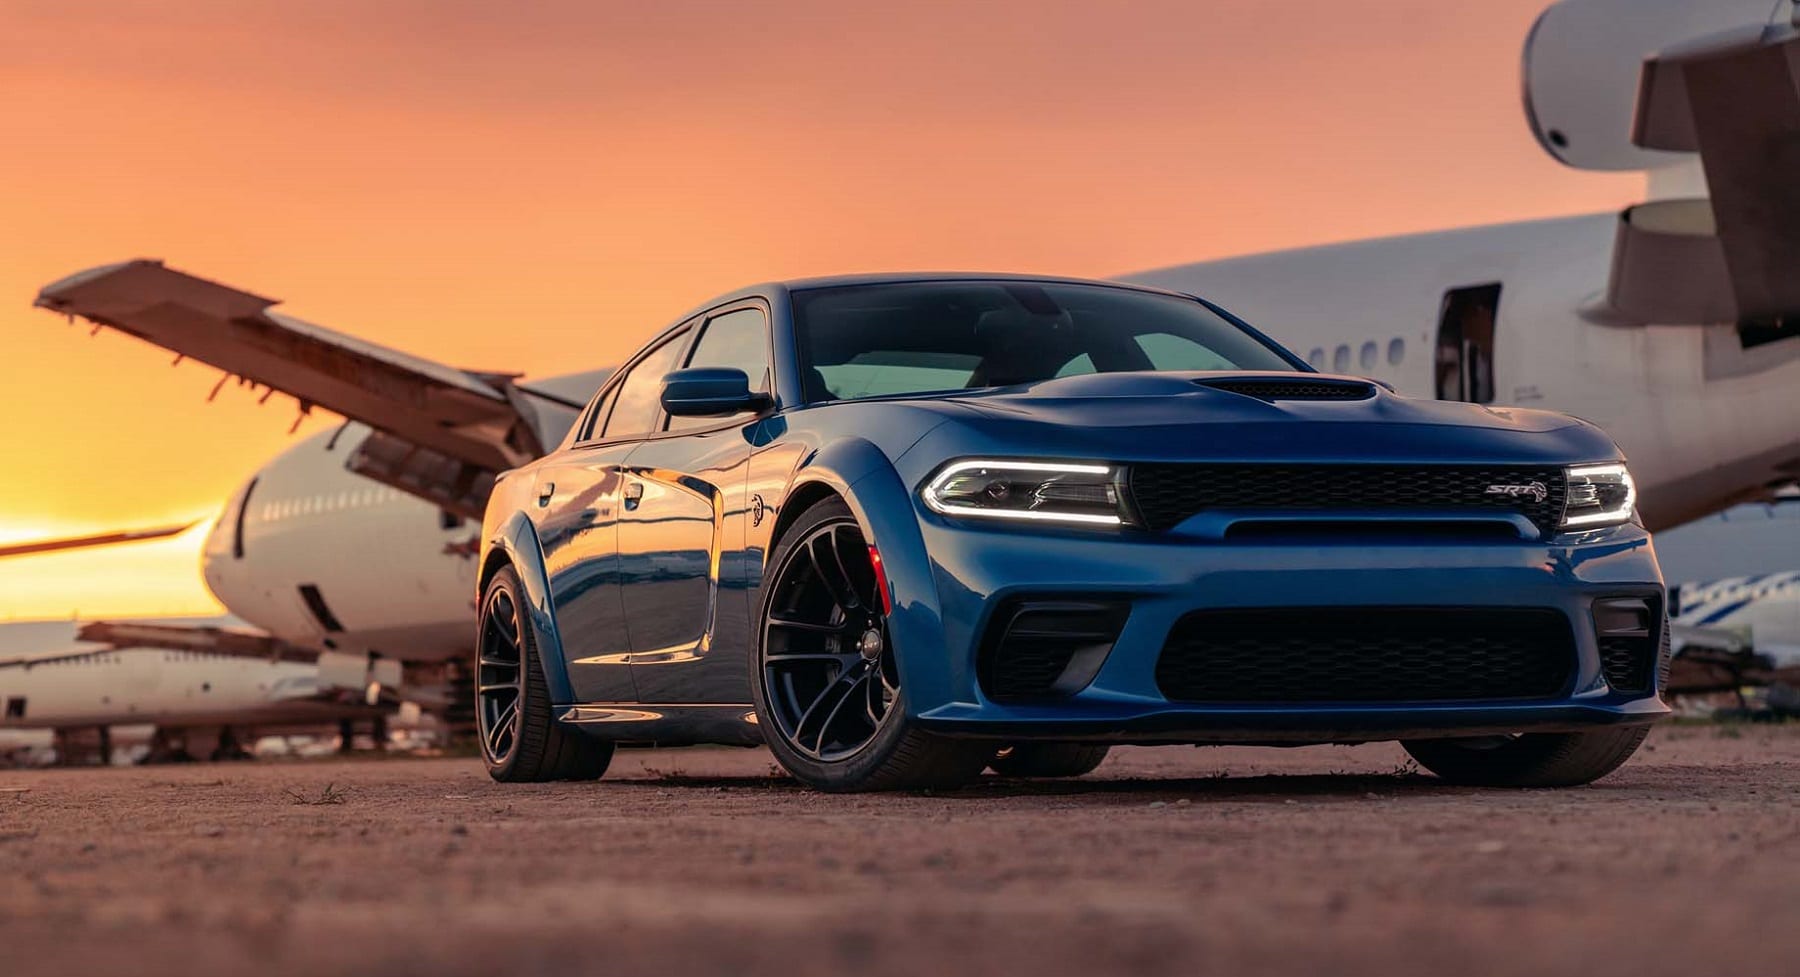 The 2020 Dodge Charger SRT Hellcat Widebody is the most powerful